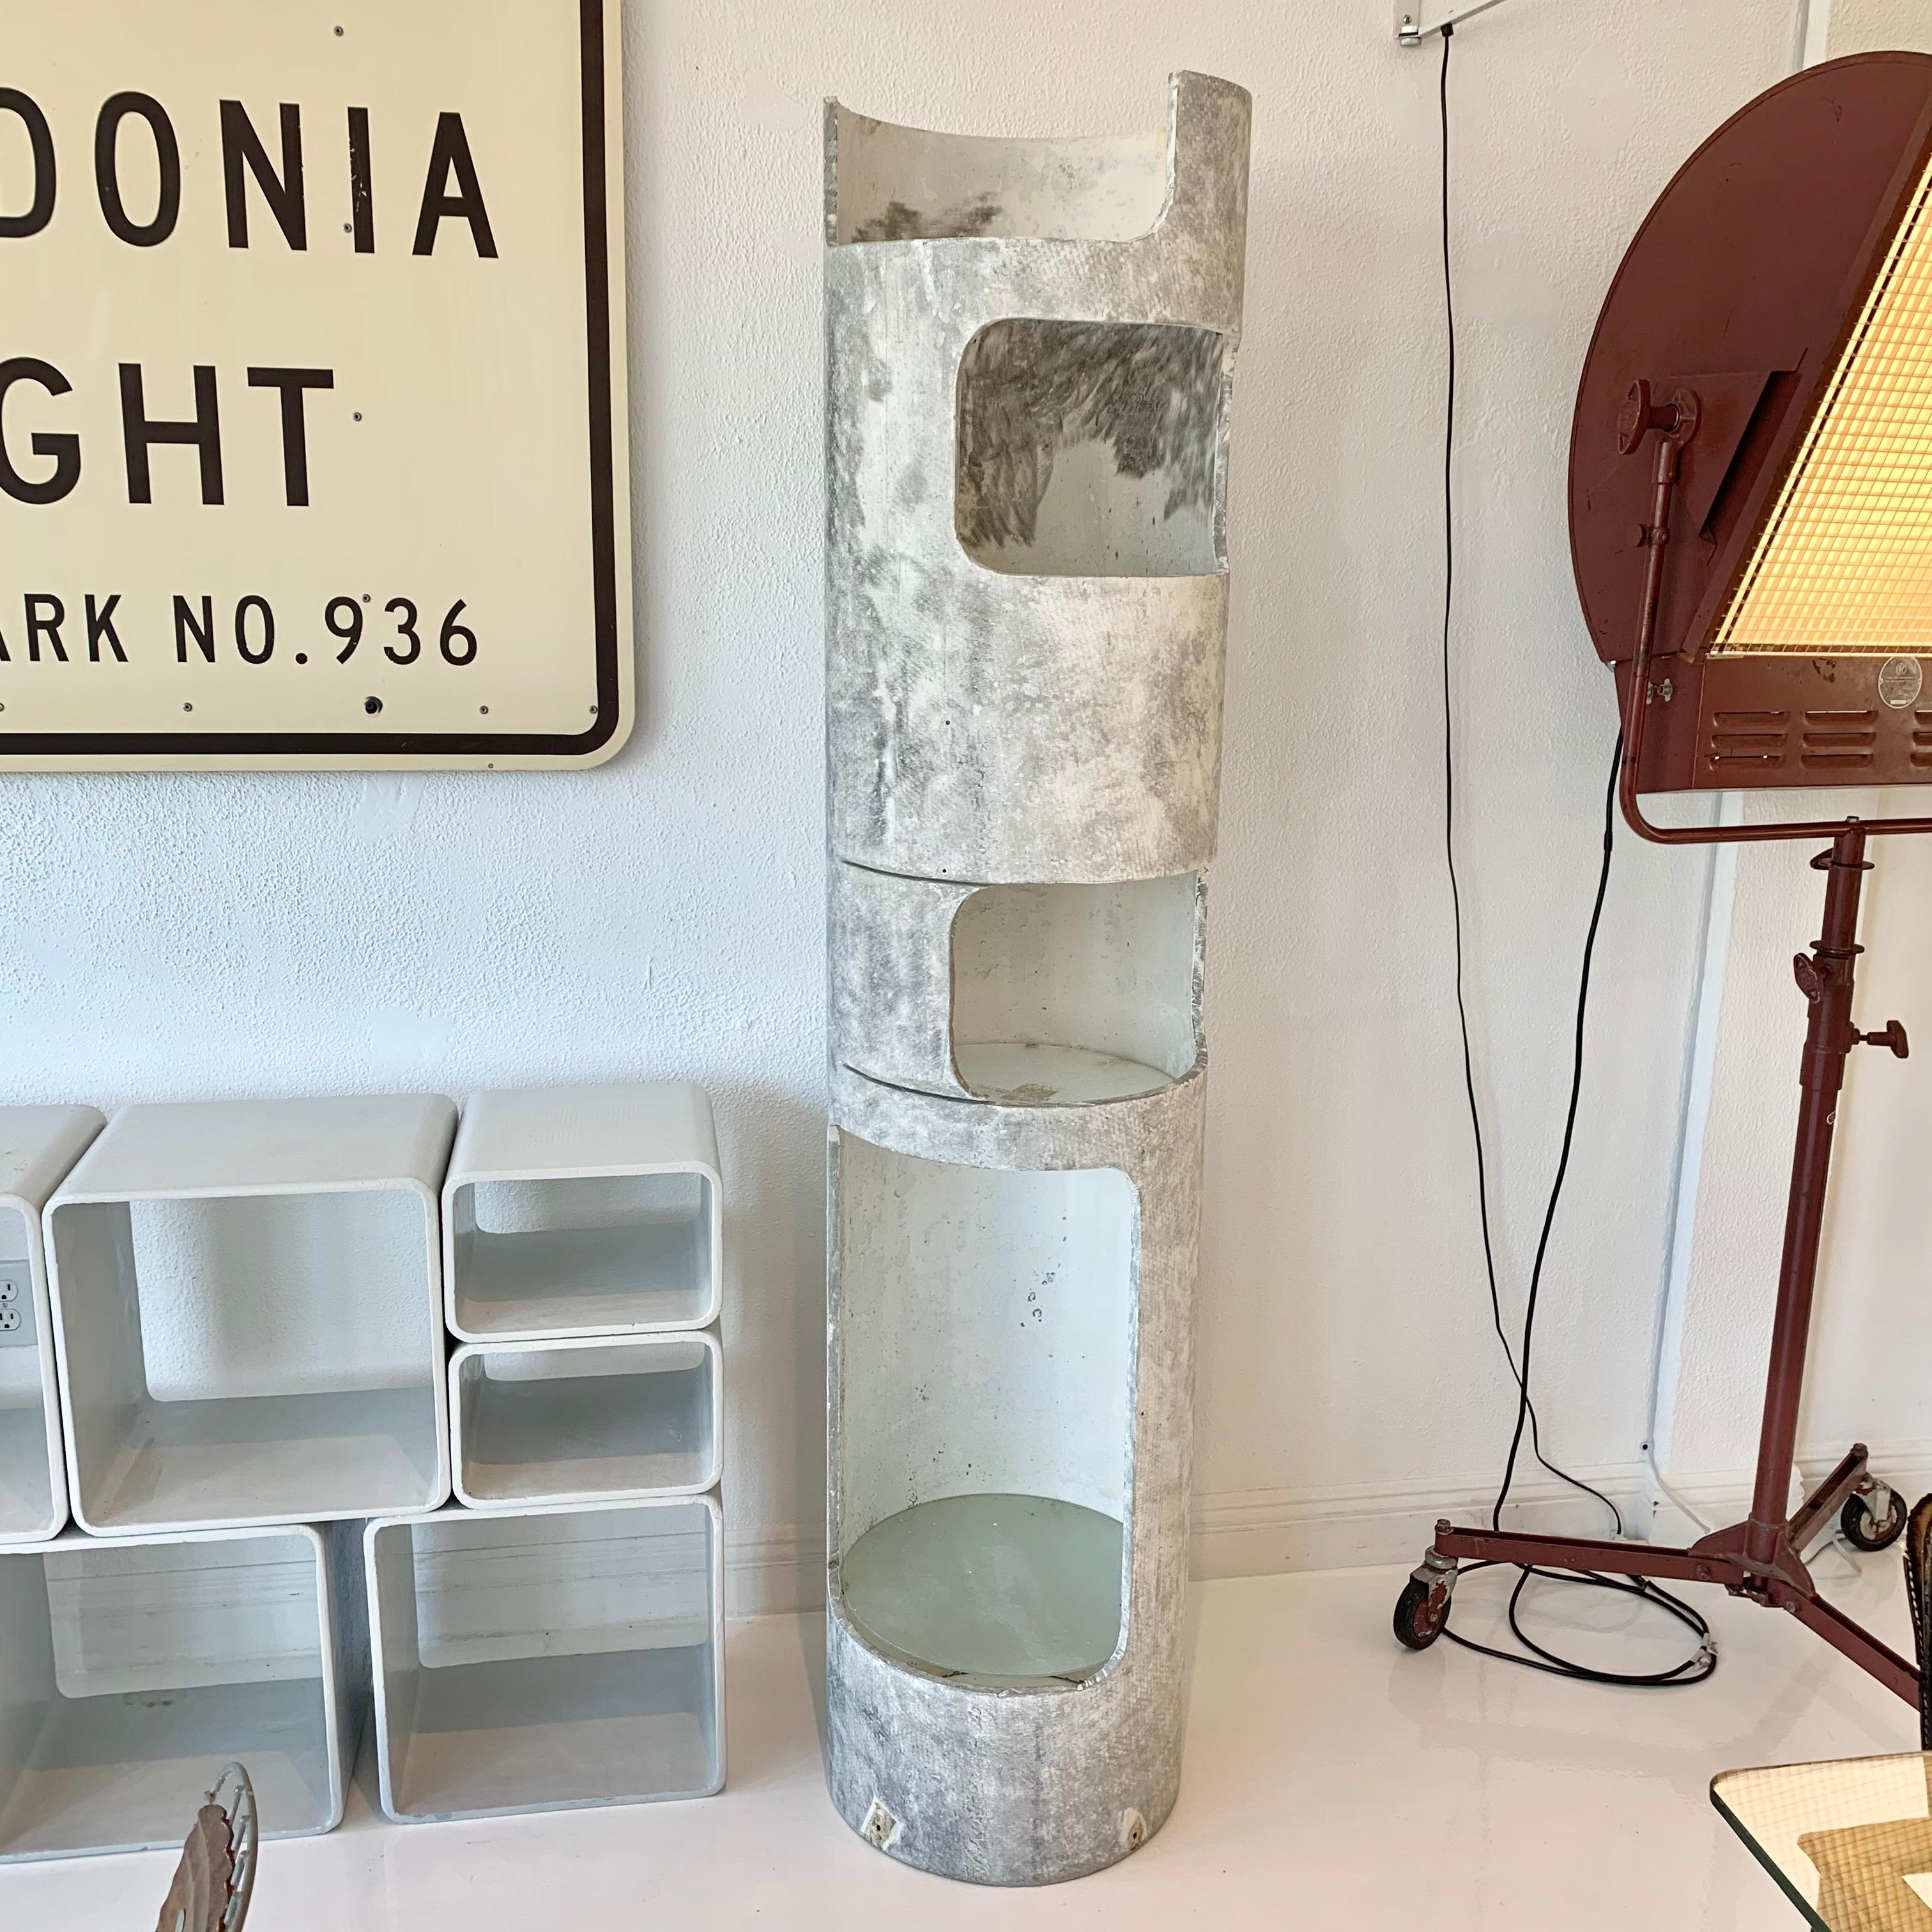 Interesting concrete tower by Willy Guhl for Eternit. Just over 6 feet tall. Concrete tower with 4 openings. Each opening holds a glass shelf. Great as a bookcase or plant stand, indoors or outside. Unusual piece. Two available in different patinas.